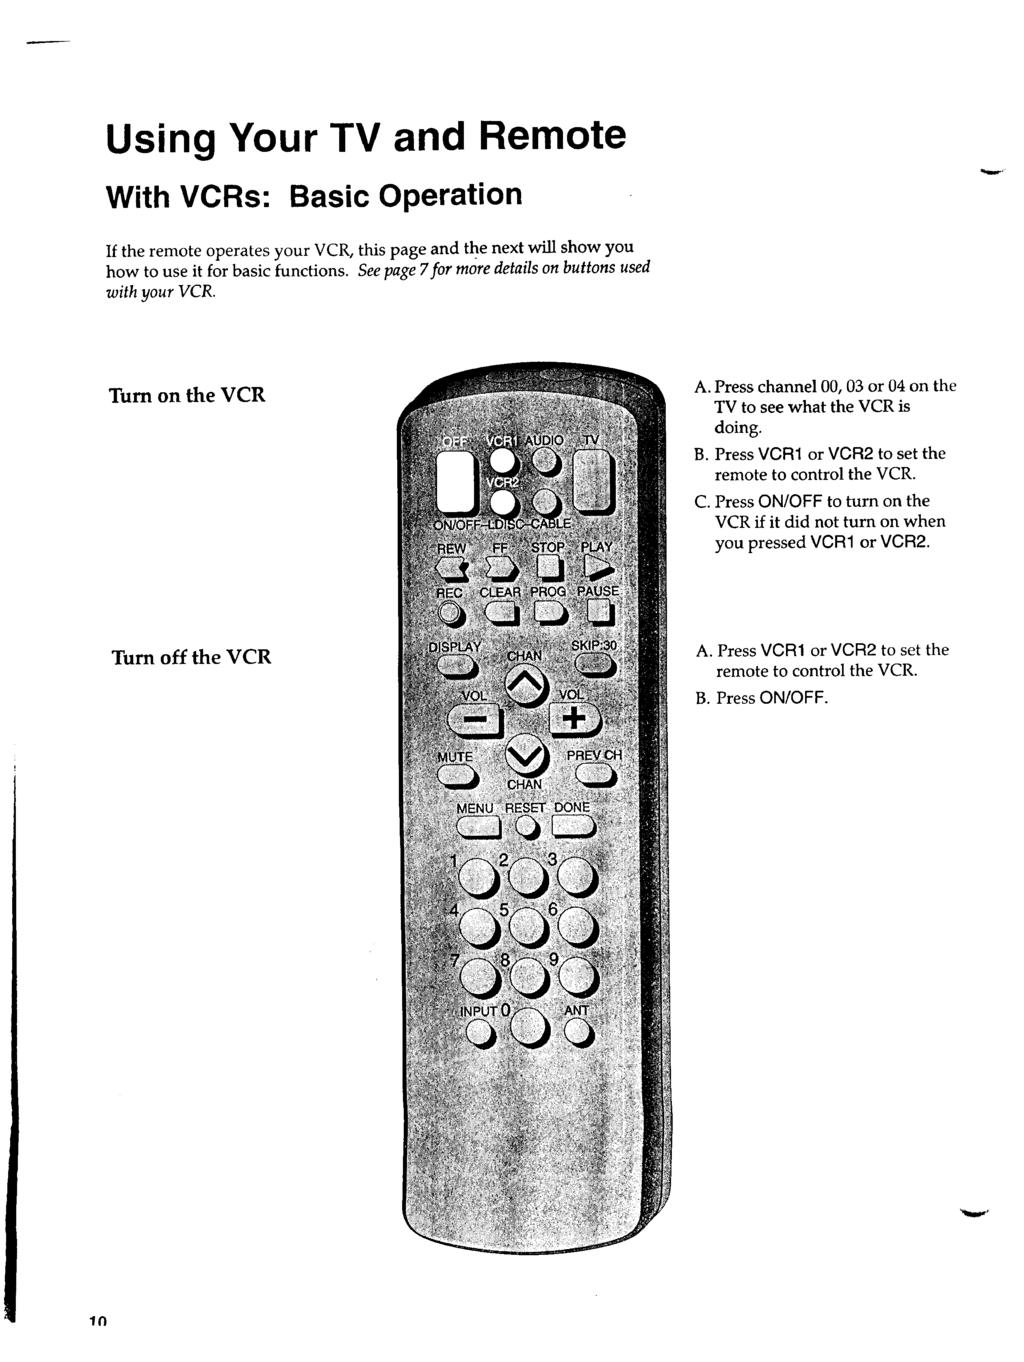 Using Your TV and Remote With VCRs: Basic Operation If the remote operates your VCR, this page and the next will show you how to use it for basic functions.